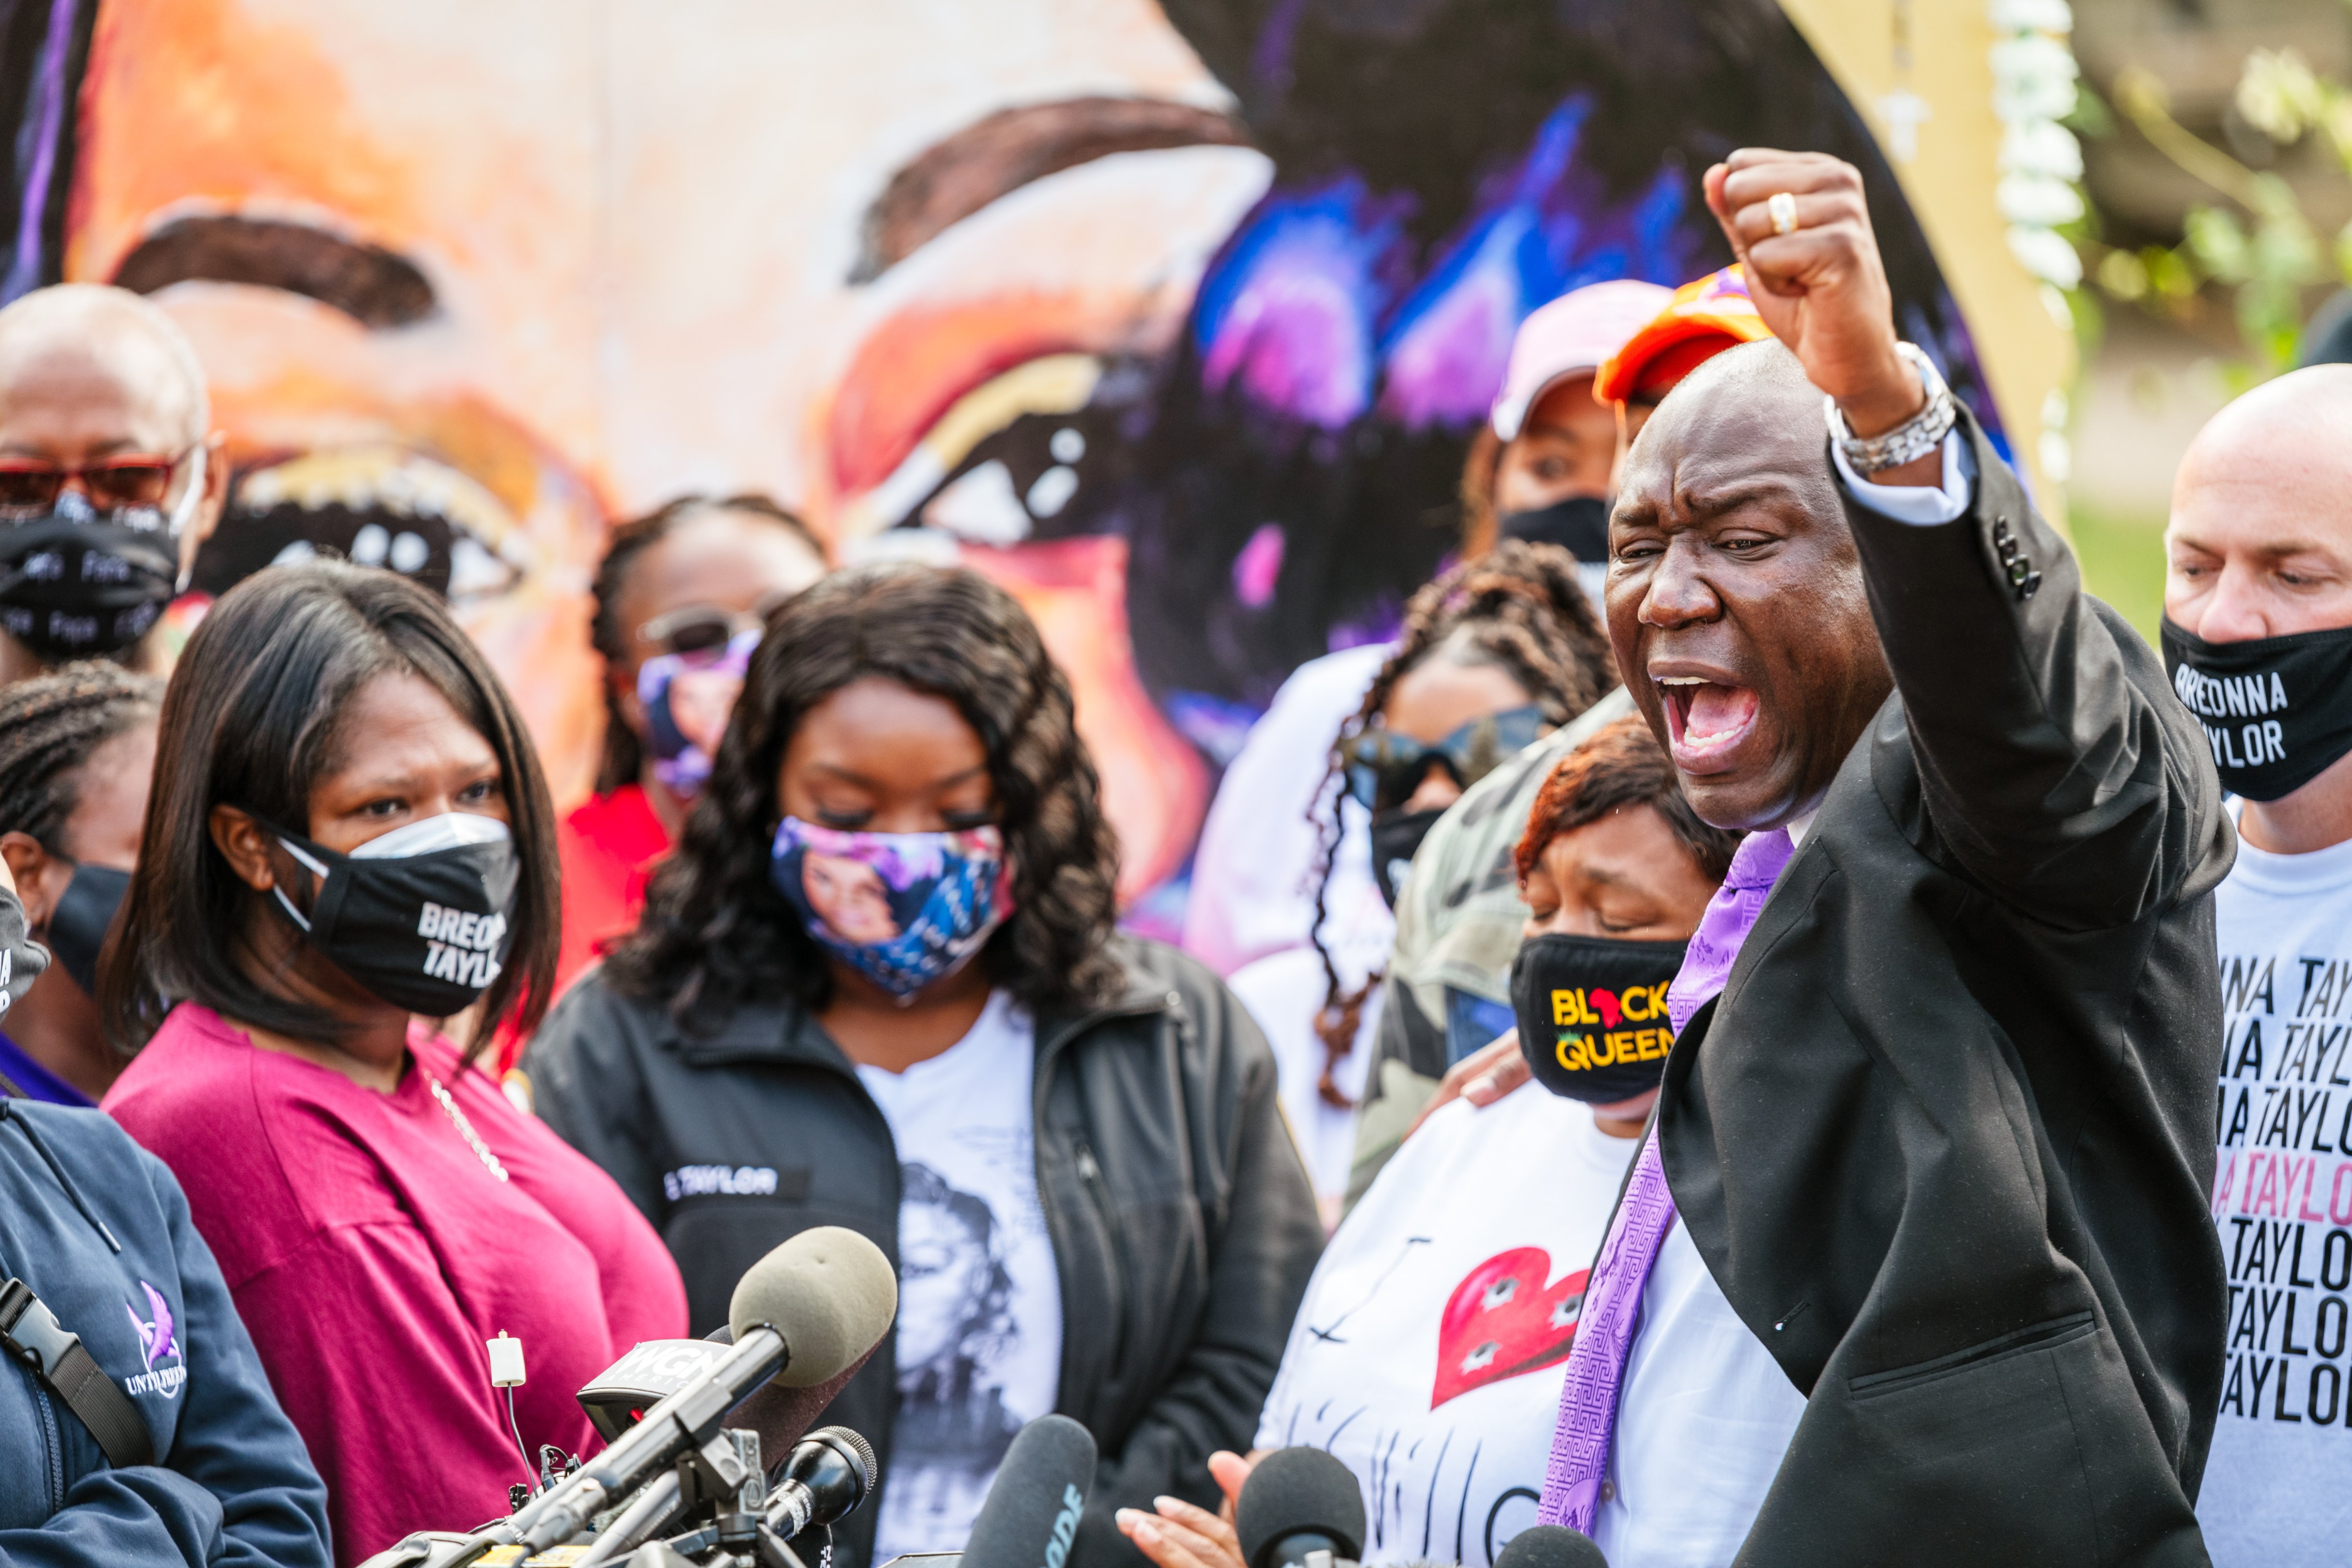 Attorney Ben Crump (R) leads a chant during a press conference on Sept 25, 2020 in Louisville, Kentucky. (Jon Cherry—Getty Images)